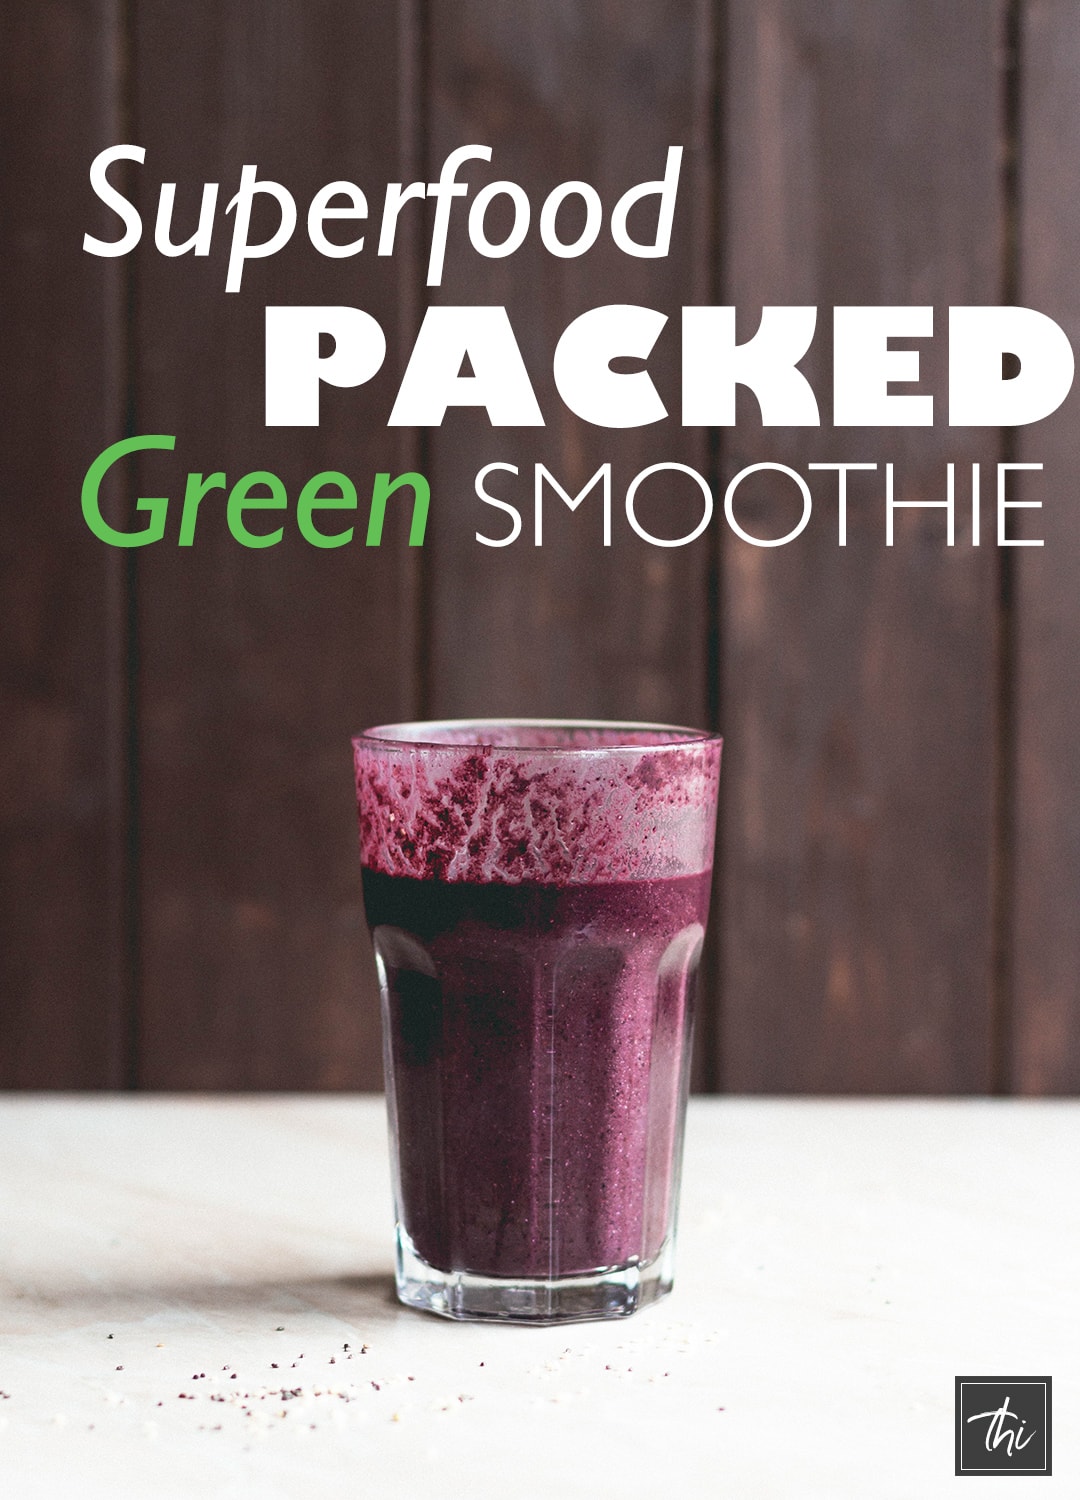 Superfood Packed Green Smoothie - the best green smoothie recipe! Ready in minutes and really nutritious! | thehealthfulideas.com